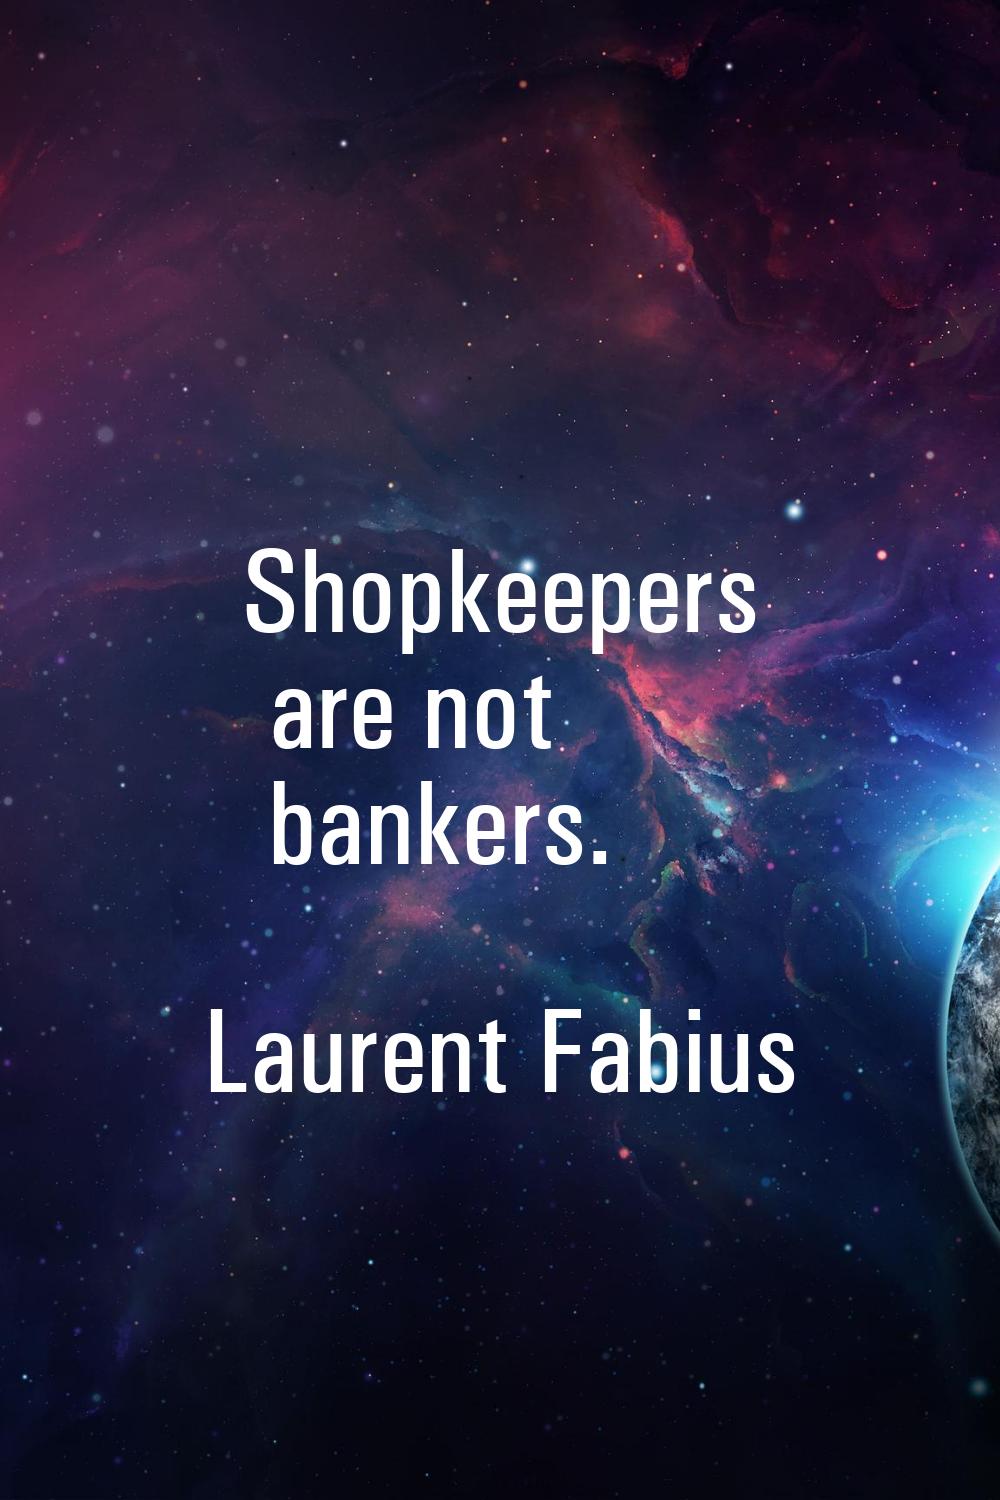 Shopkeepers are not bankers.